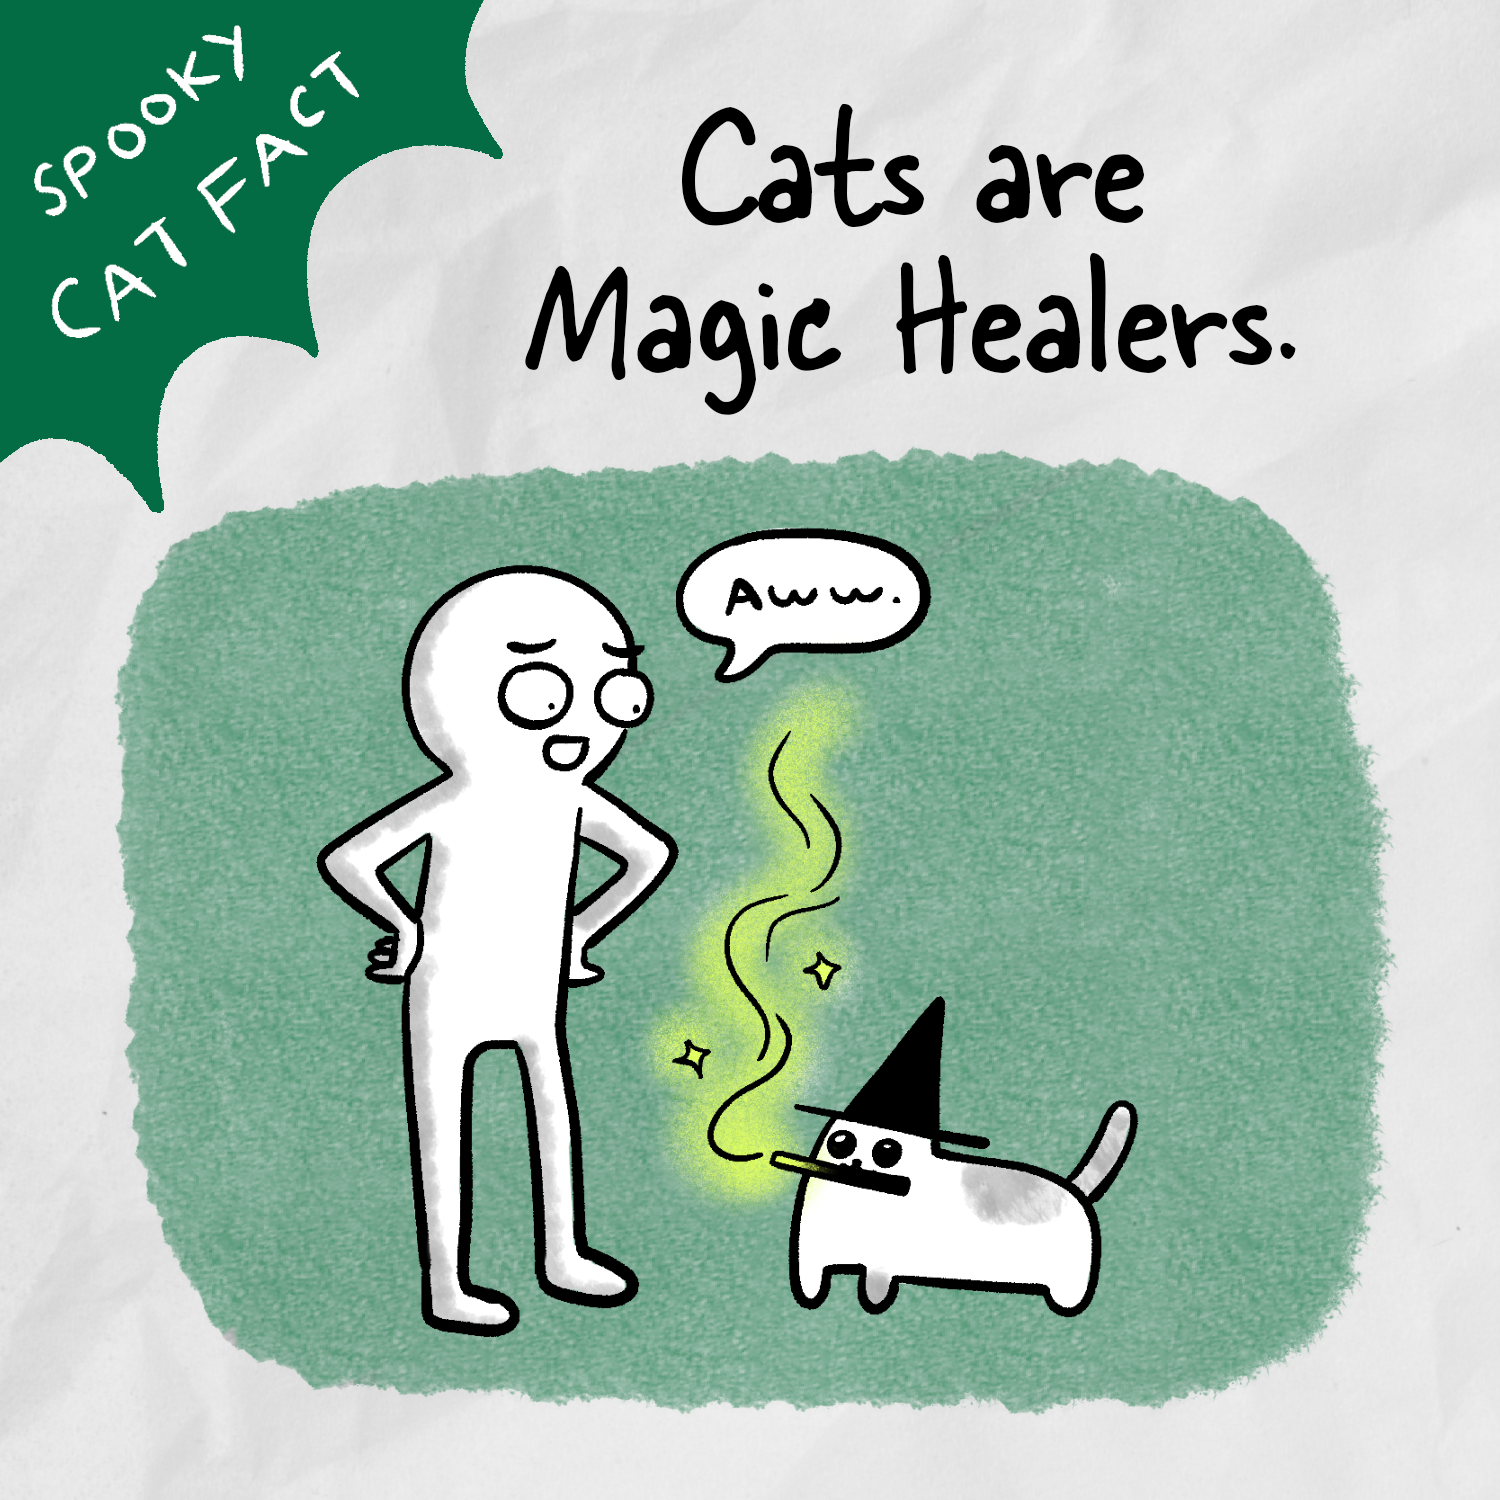 Spooky Cat Fact: Cats are Magic Healers